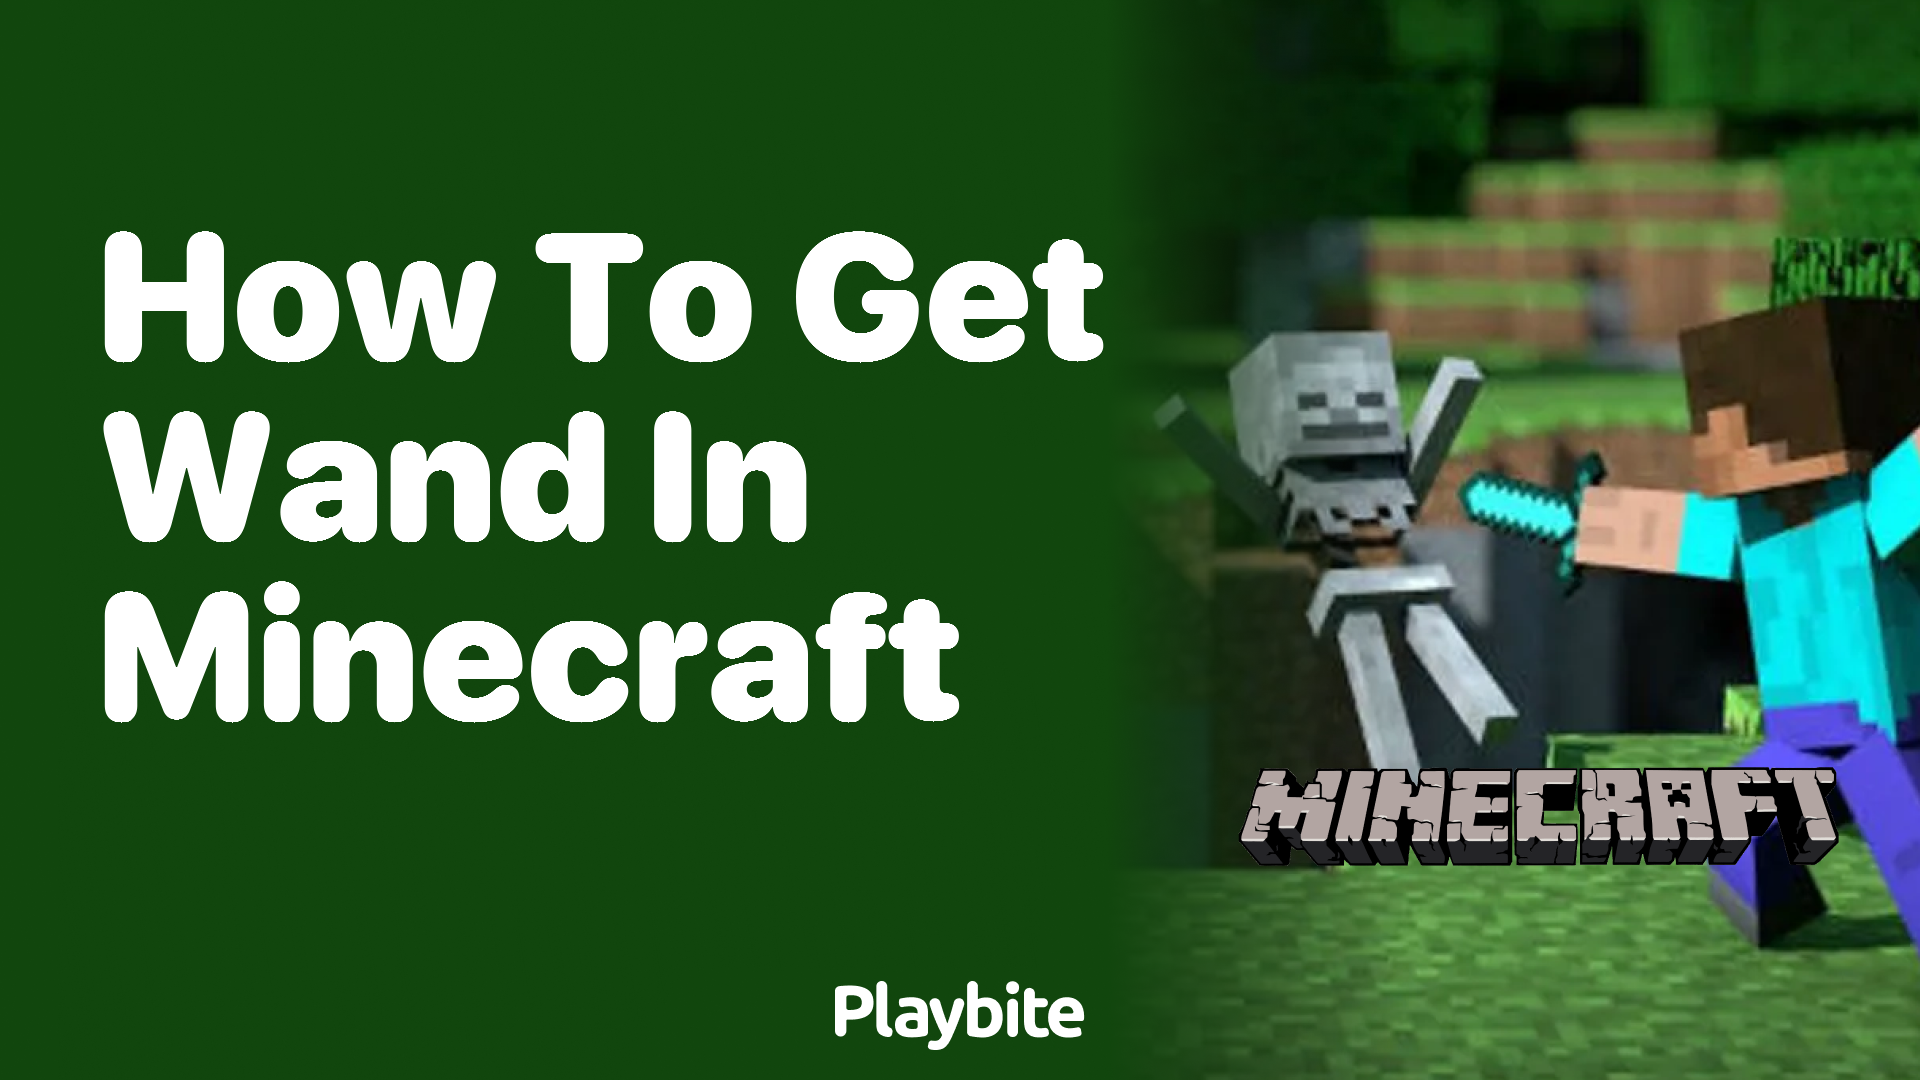 How to Get a Wand in Minecraft